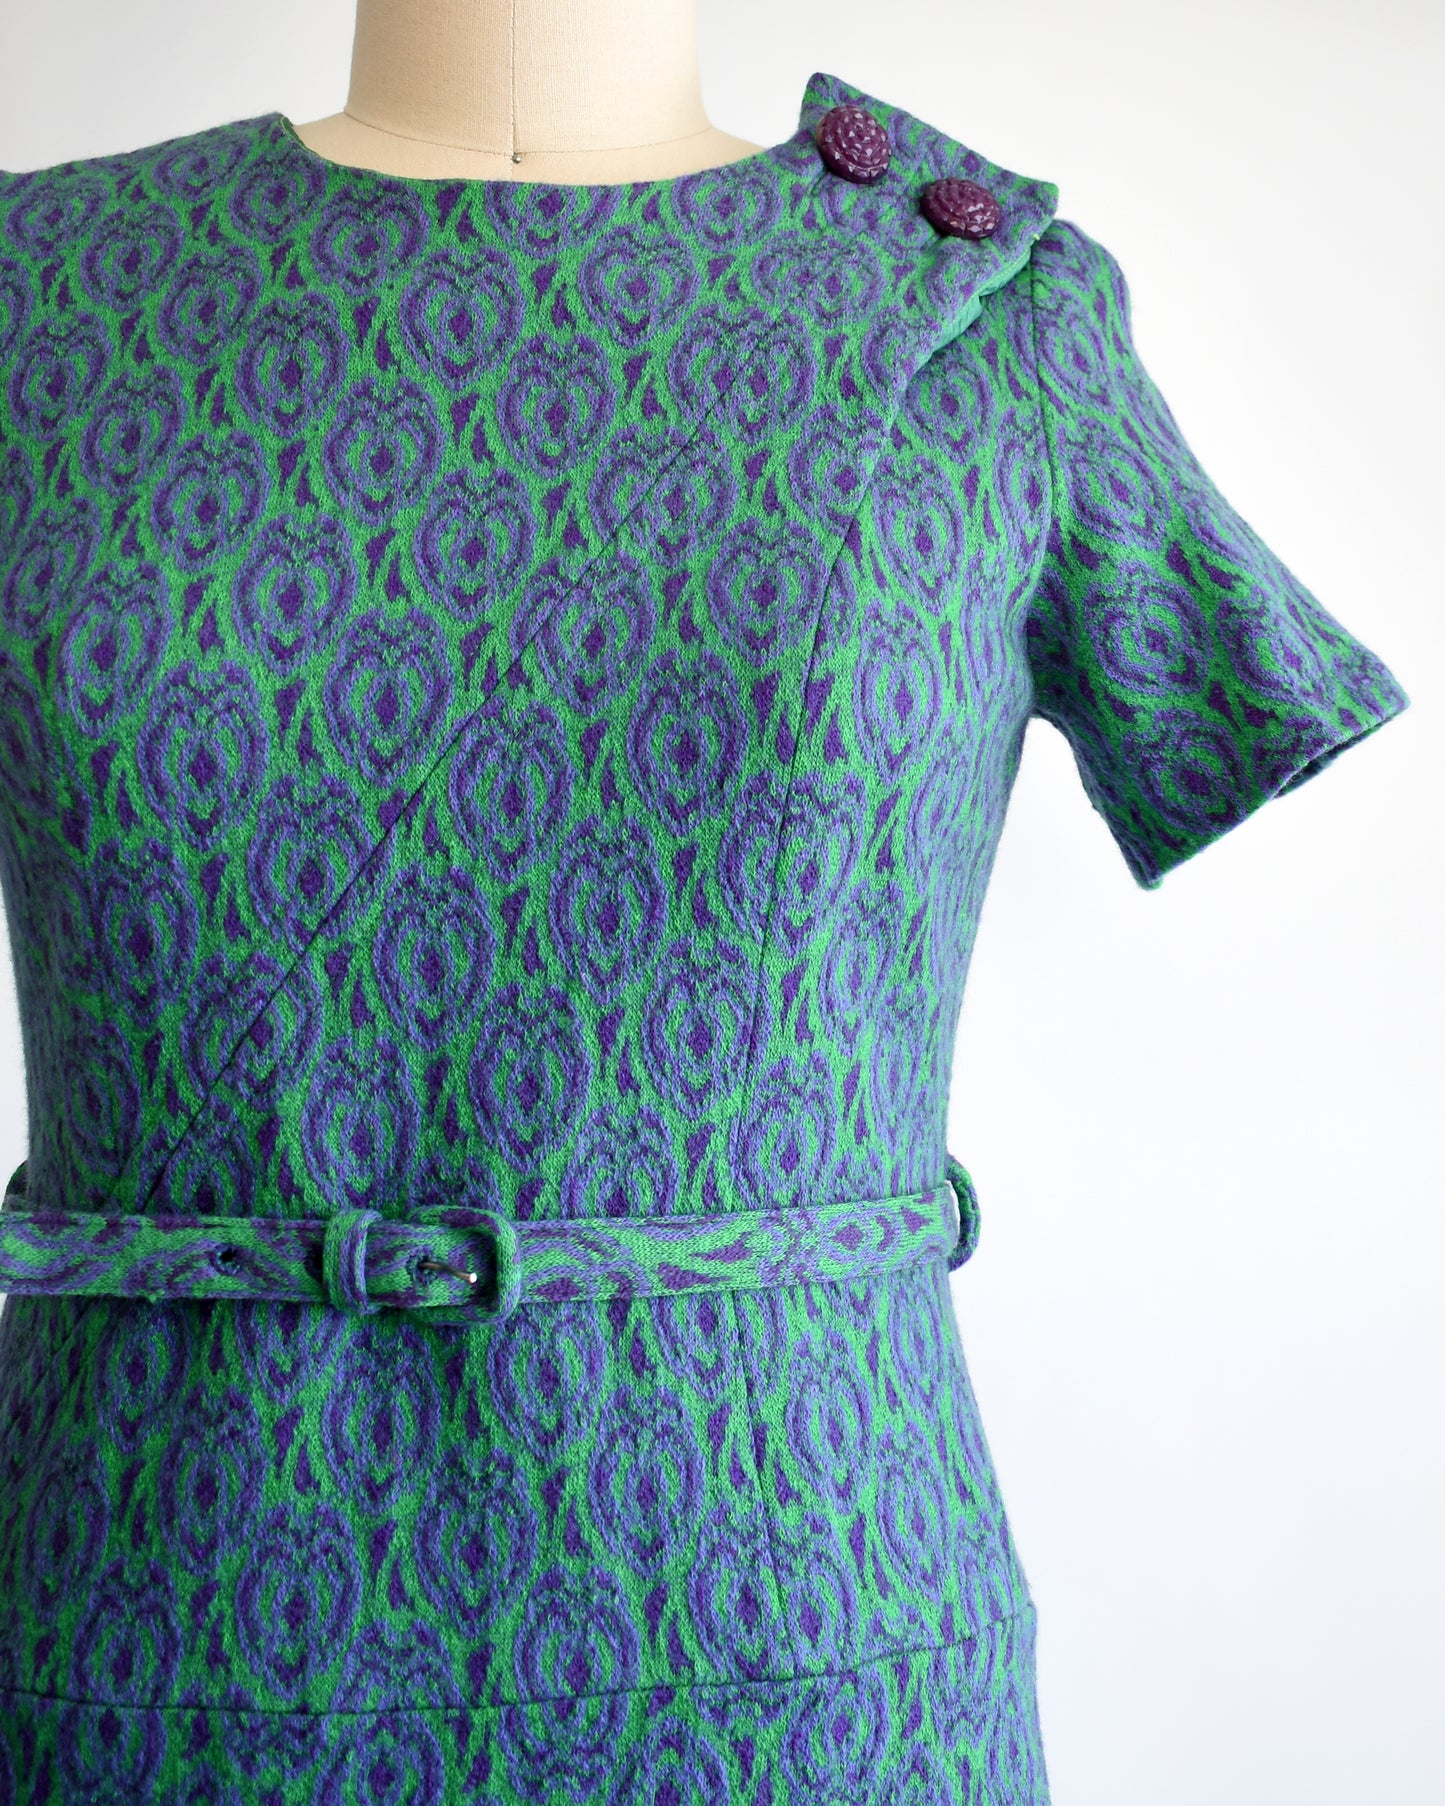 Close up of a vintage 1960s green and purple drop waist dress and matching belt